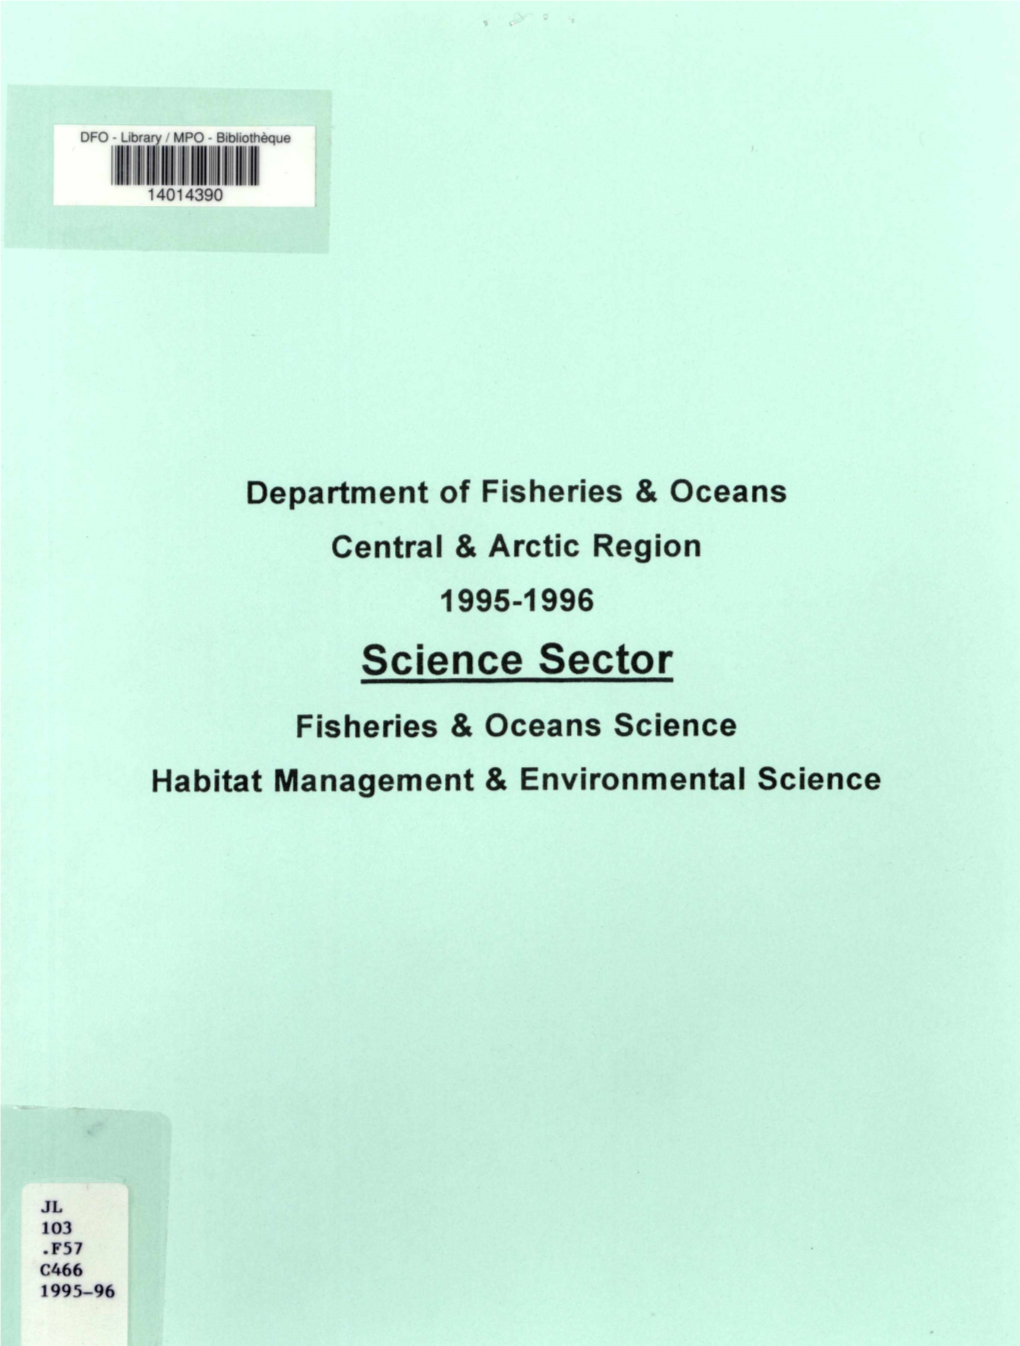 Science Sector Fisheries & Oceans Science Habitat Management & Environmental Science